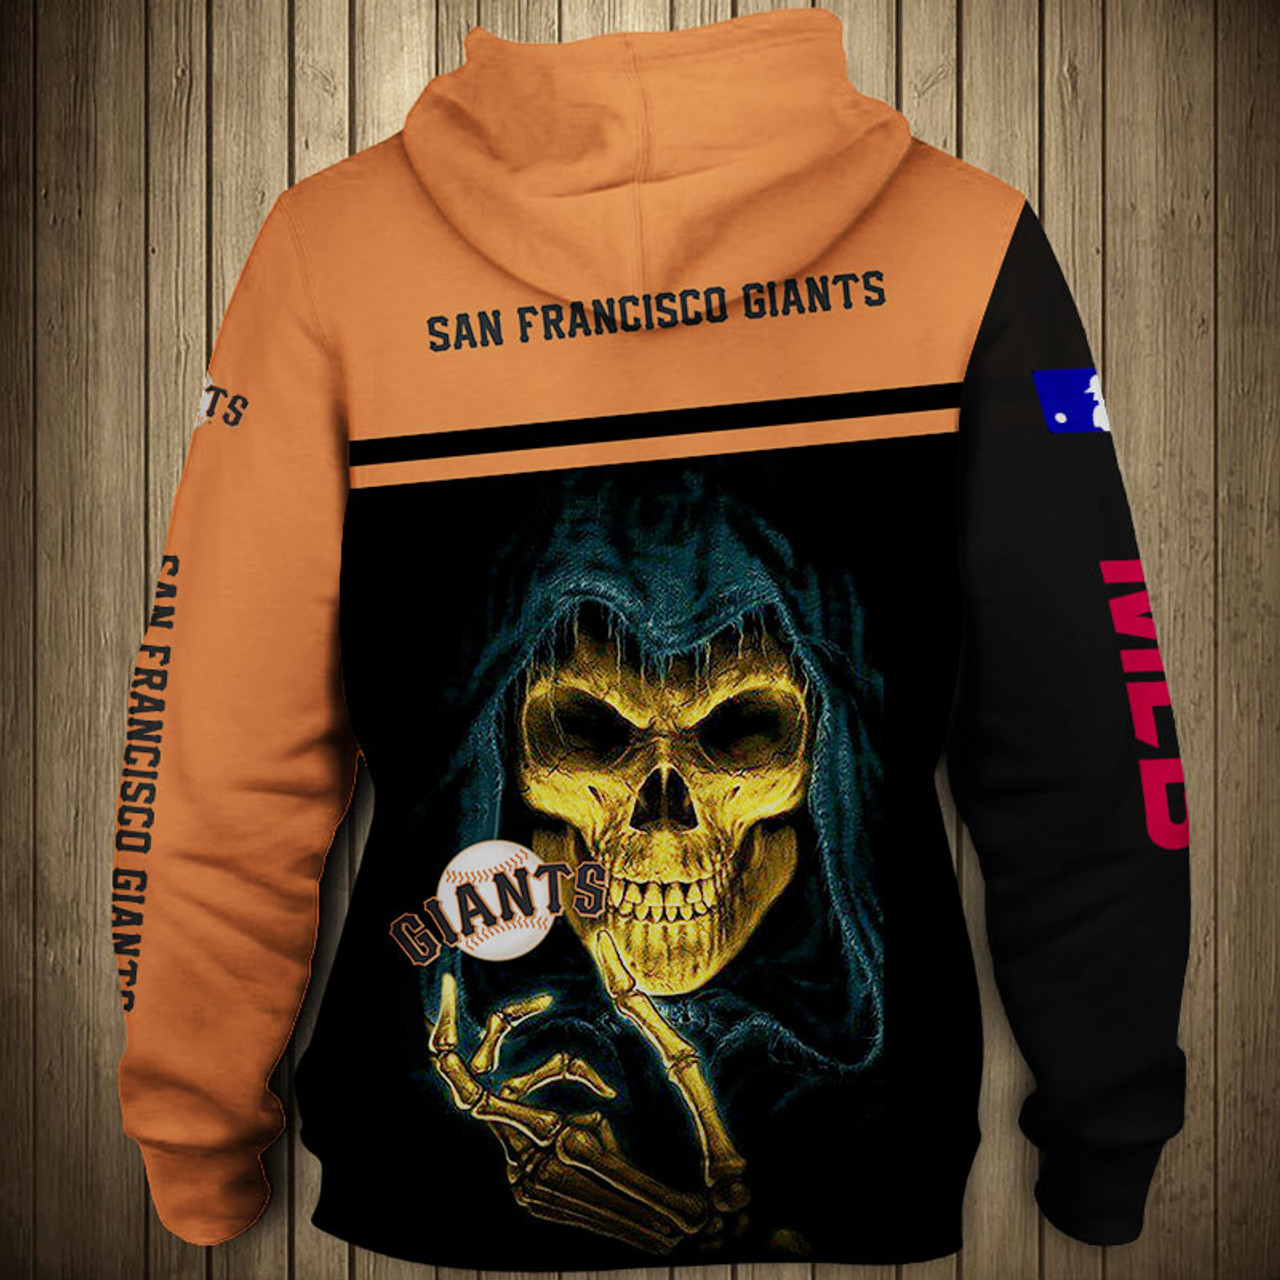 **(OFFICIAL-M.L.B.SAN-FRANCISCO-GIANTS-TEAM-ZIPPERED-HOODIES/NICE-CUSTOM-DETAILED-3D-GRAPHIC-PRINTED/PREMIUM-ALL-OVER-DOUBLE-SIDED-DESIGN/OFFICIAL-GIANTS-TEAM-COLORS & CLASSIC-GIANTS-3D-GRAPHIC-LOGOS/TRENDY-NEW-PREMIUM-M.L.B.ZIPPERED-HOODIES)**